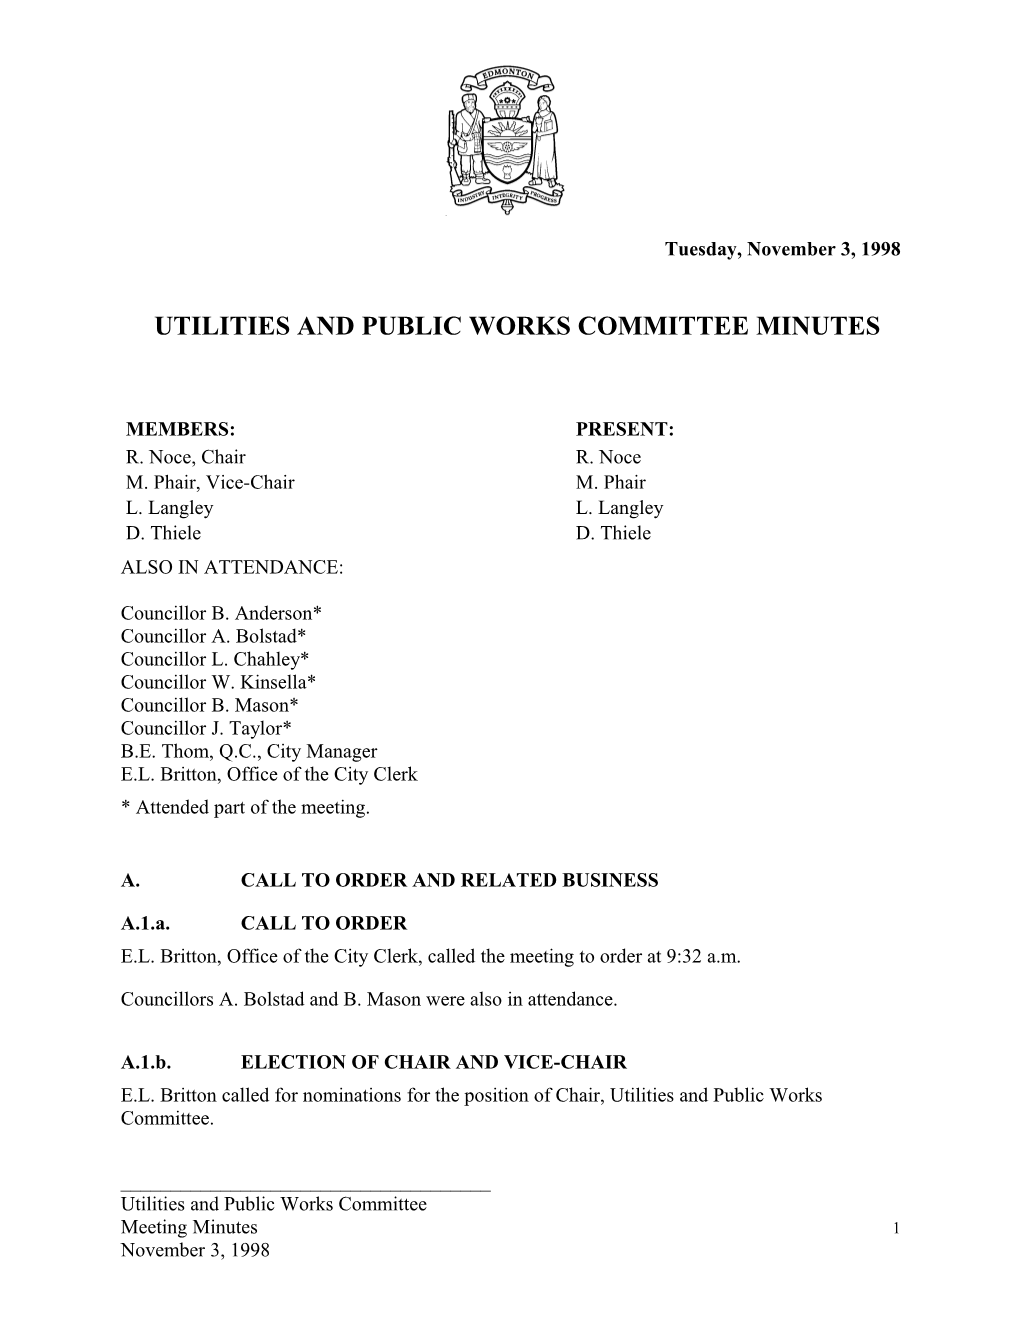 Minutes for Utilities and Public Works Committee November 3, 1998 Meeting